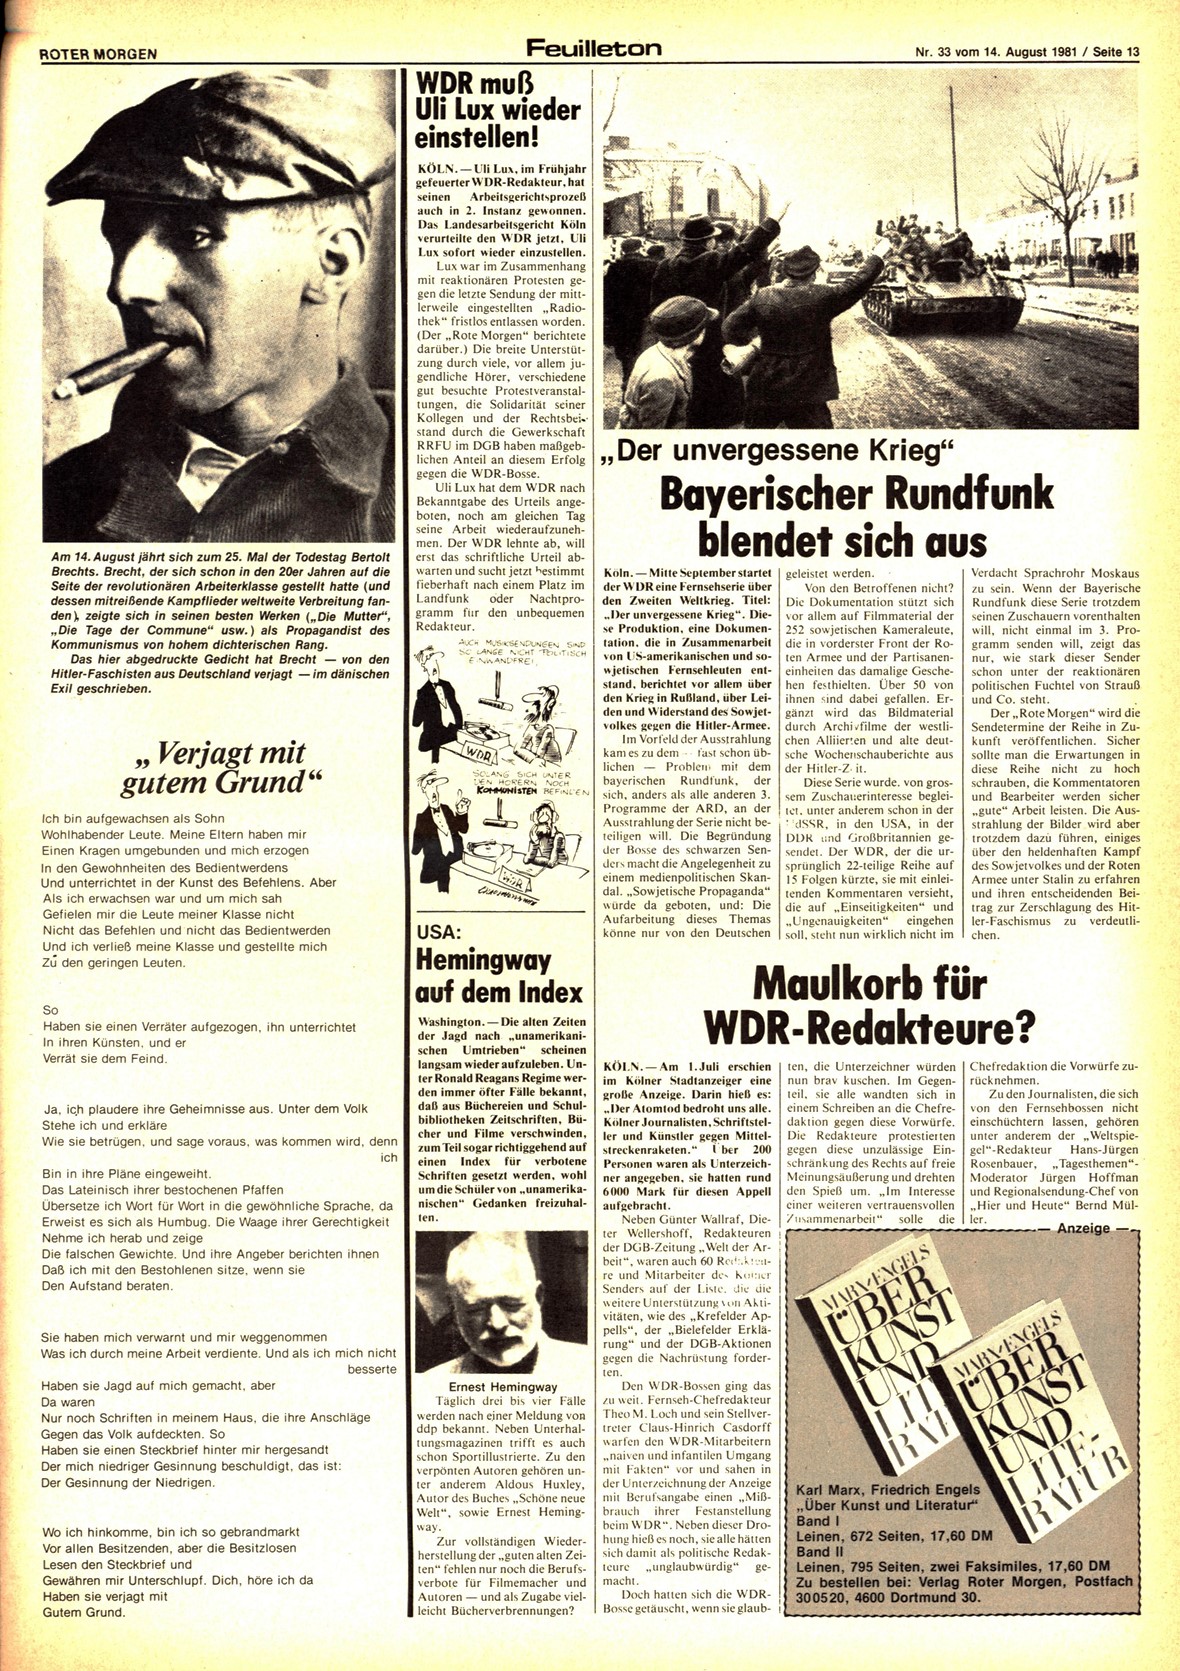 Roter Morgen, 15. Jg., 14. August 1981, Nr. 33, Seite 13